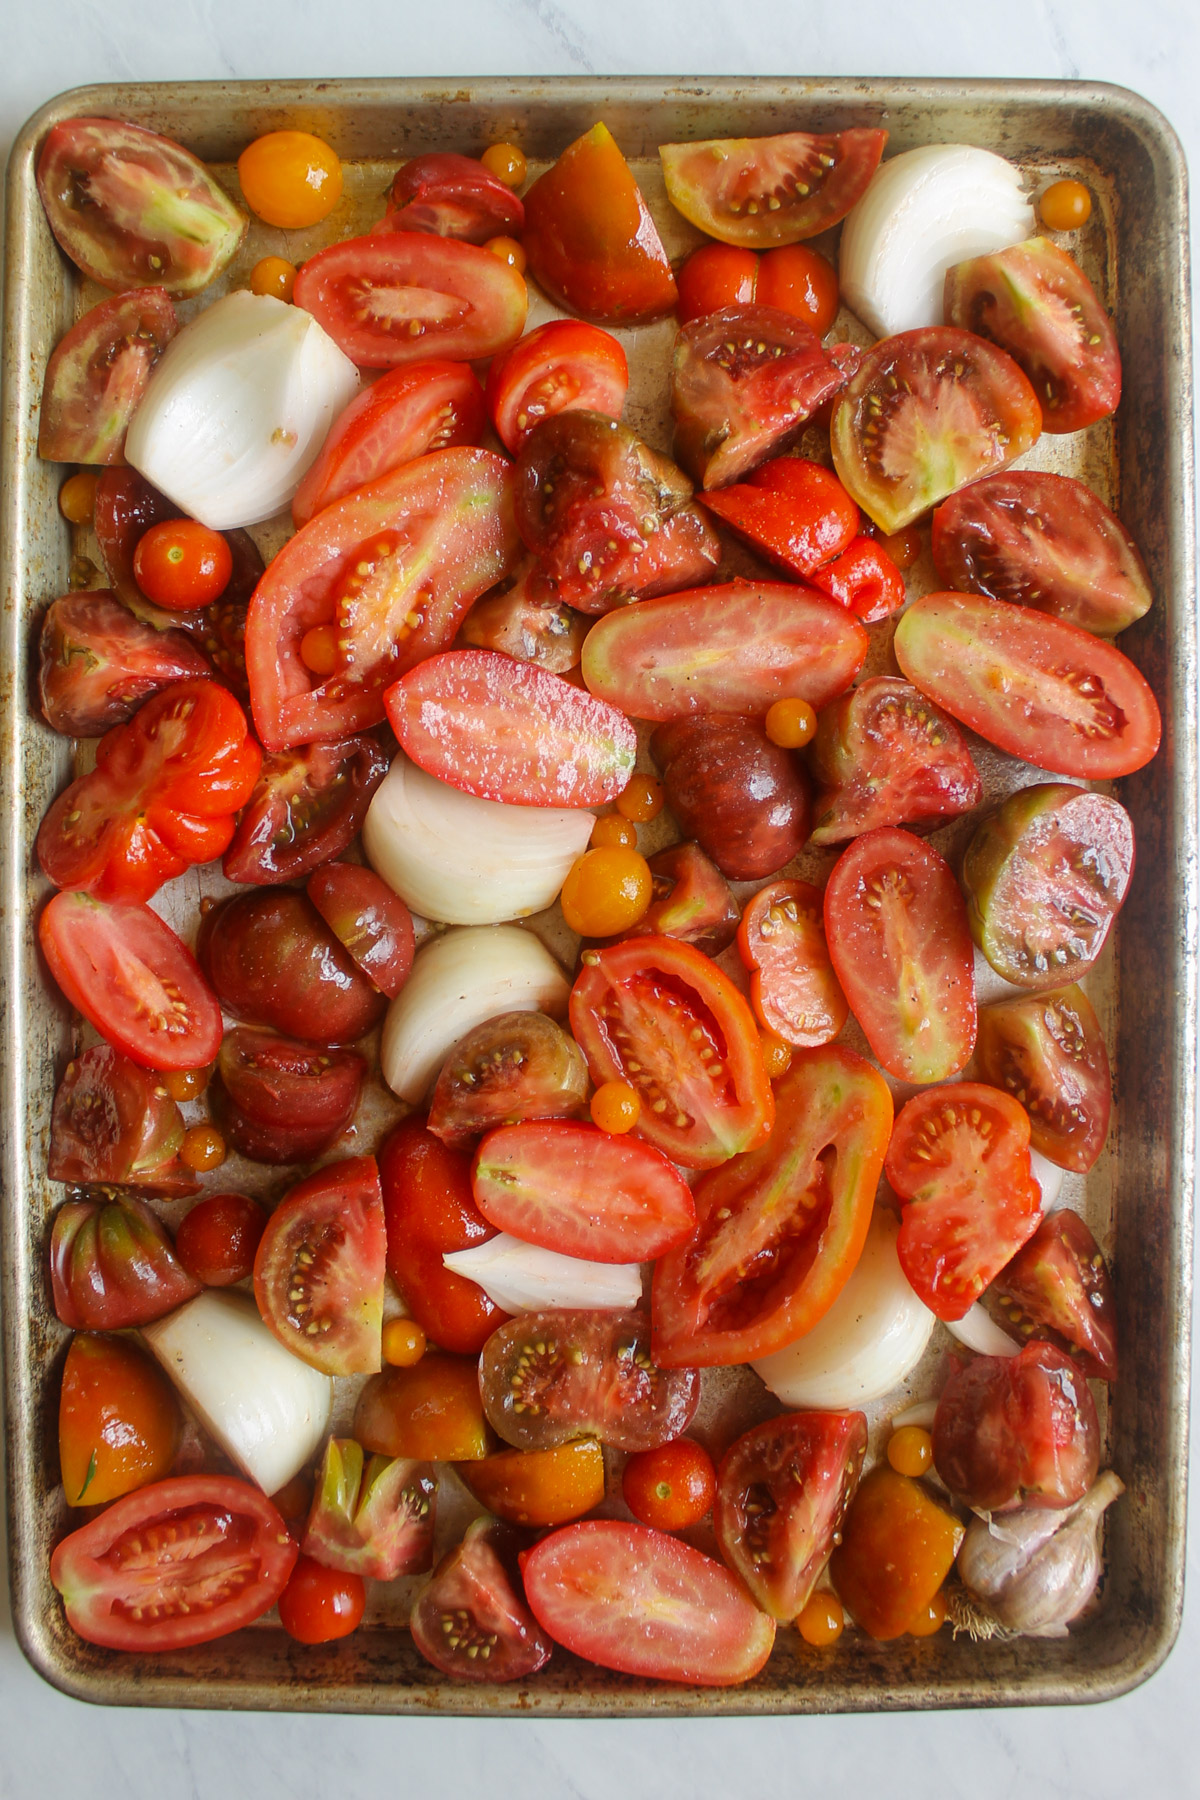 A sheet pan of raw tomatoes cut in pieces with onion and garlic to roast.